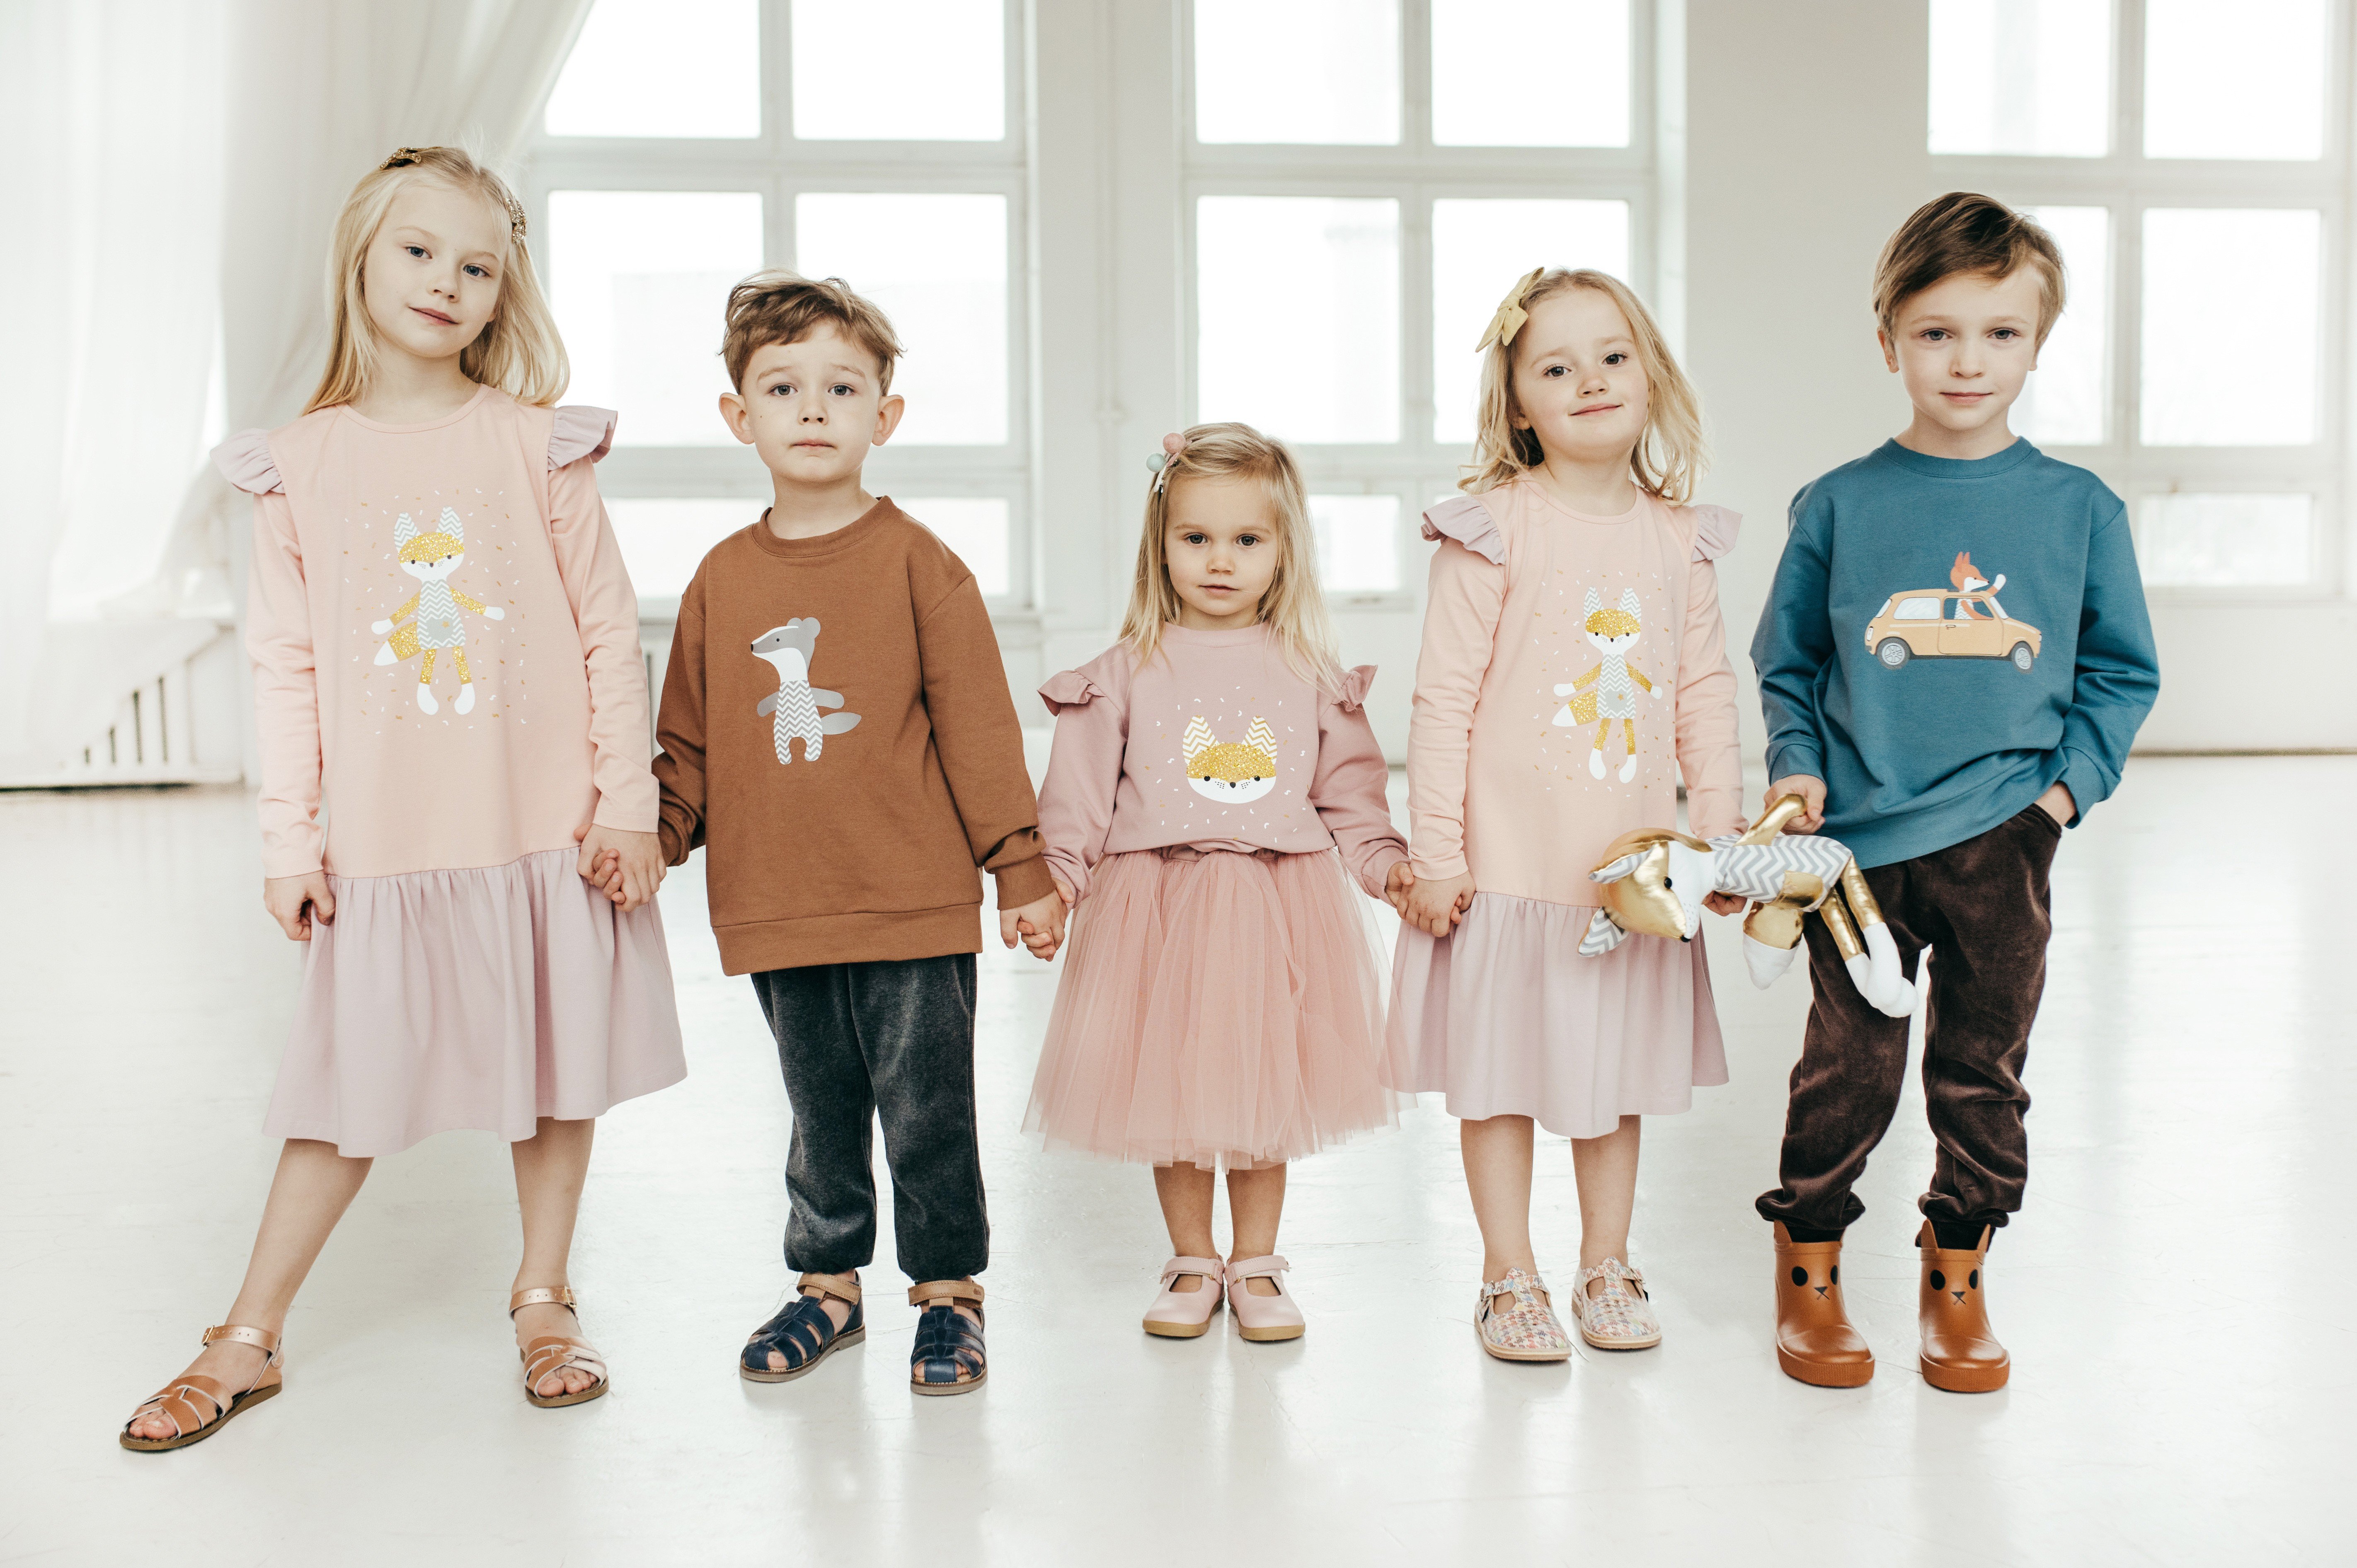 HEBE in a collaboration with ‘’TUTA’S LIETAS’’ has created new winter 2021 clothing collection for children. 